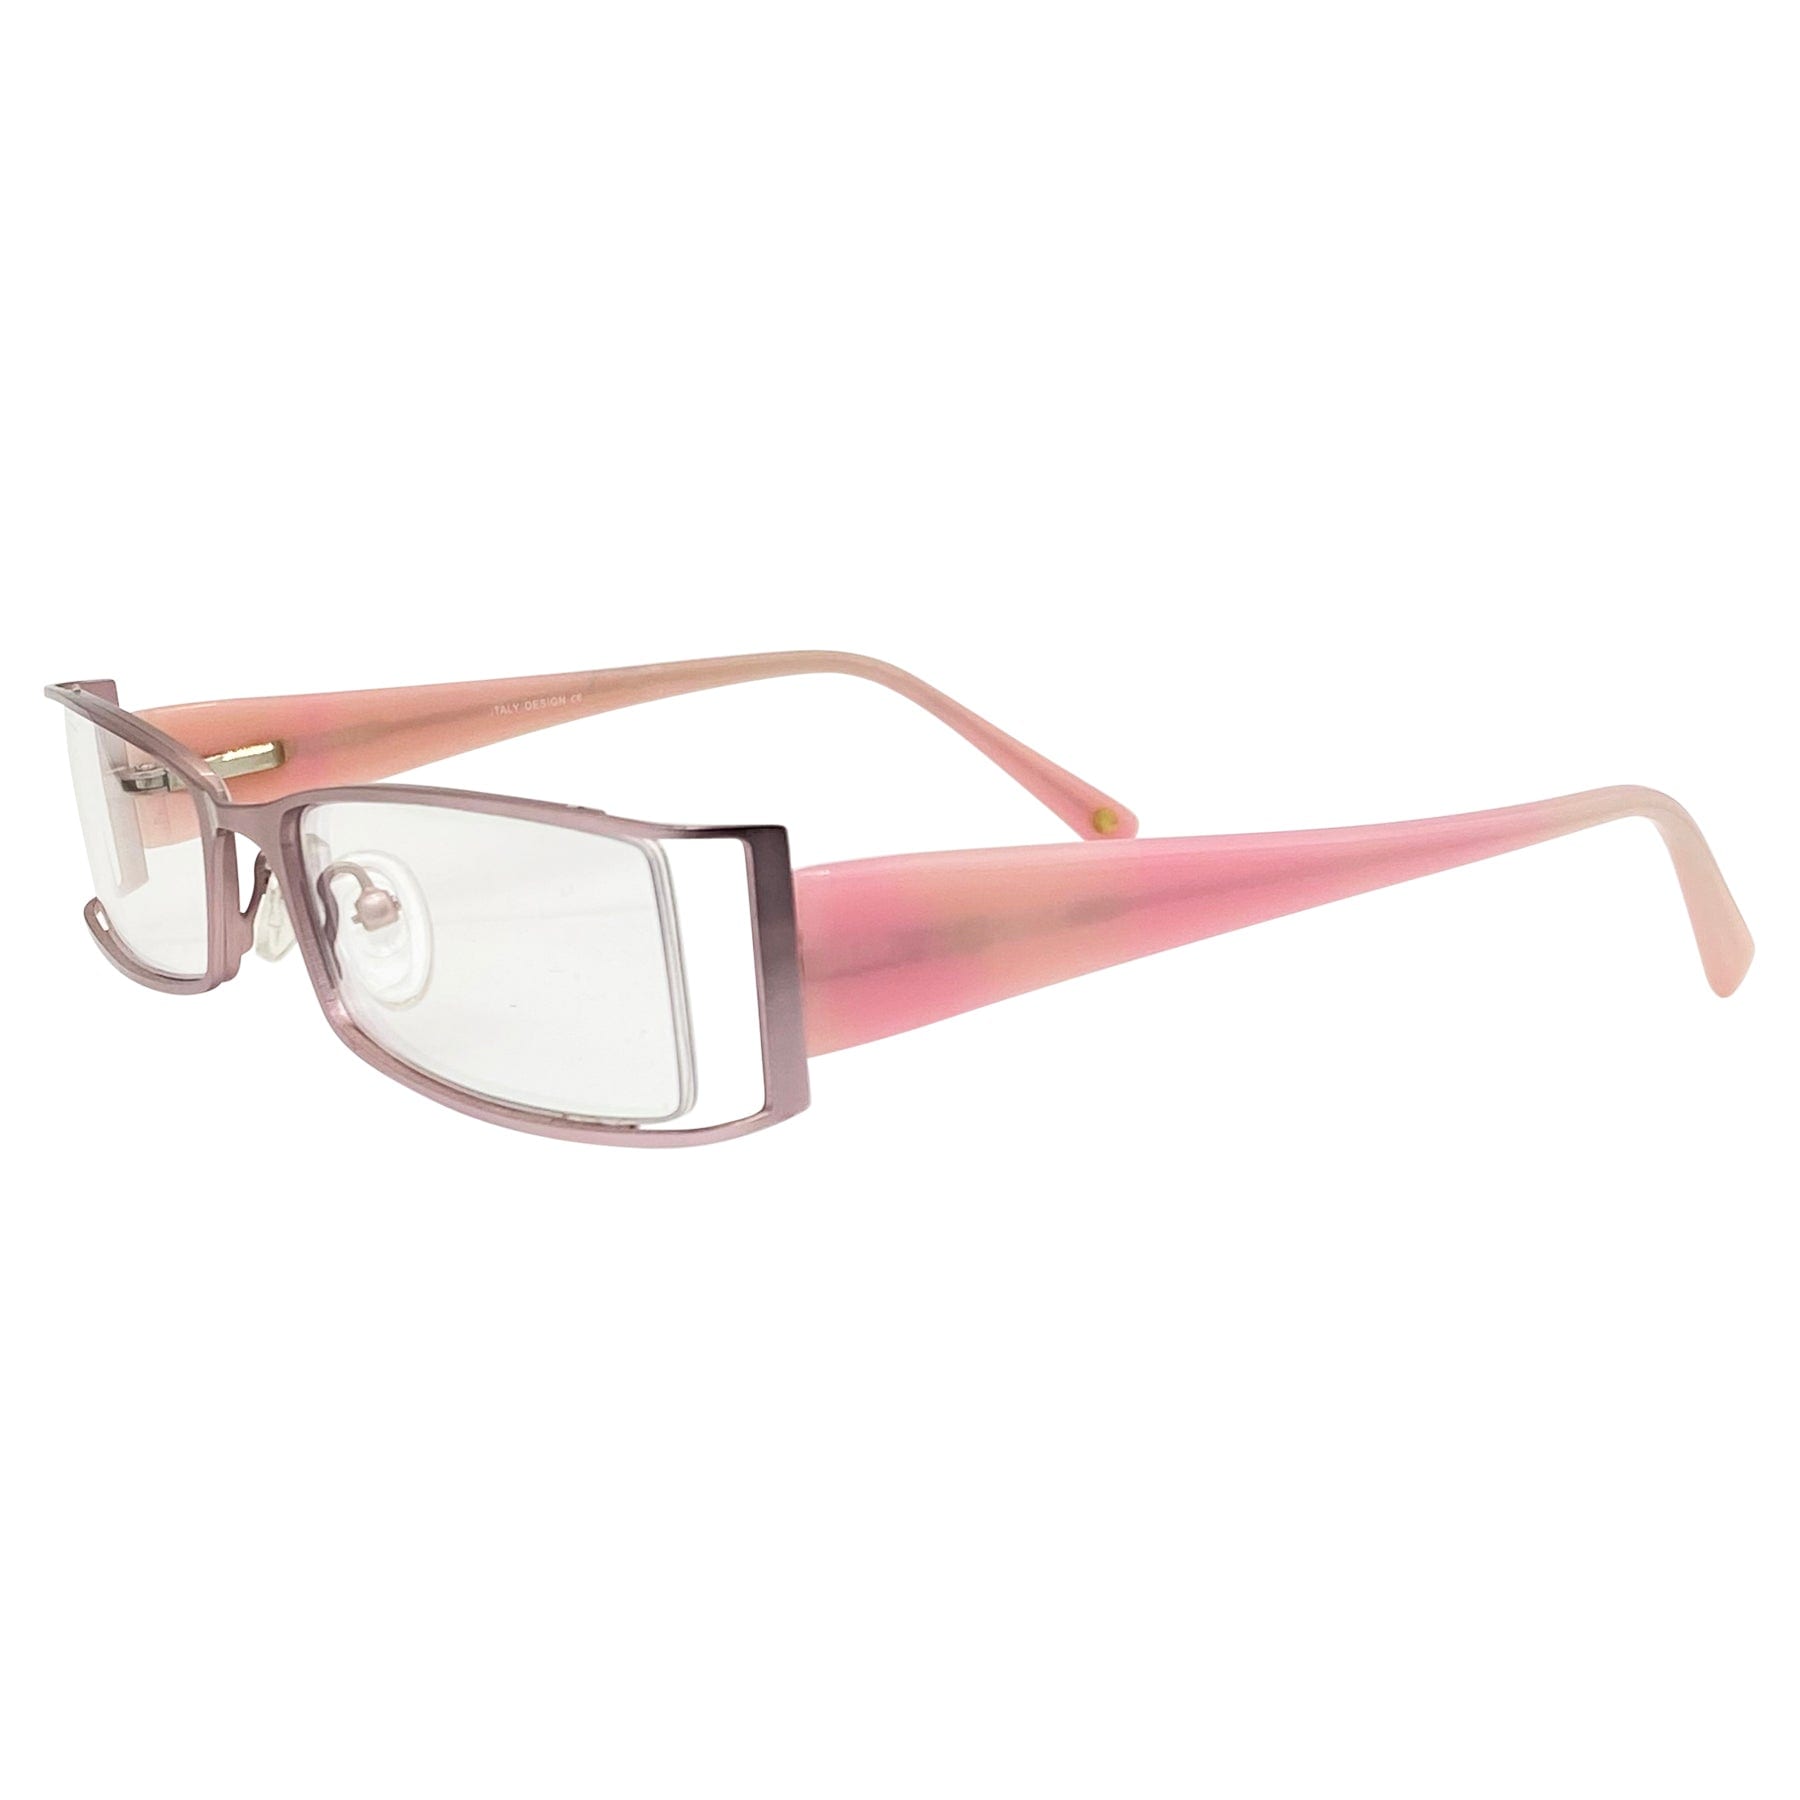 retro 90s bayonetta style frame, pink metal frame with a pink gloss temple